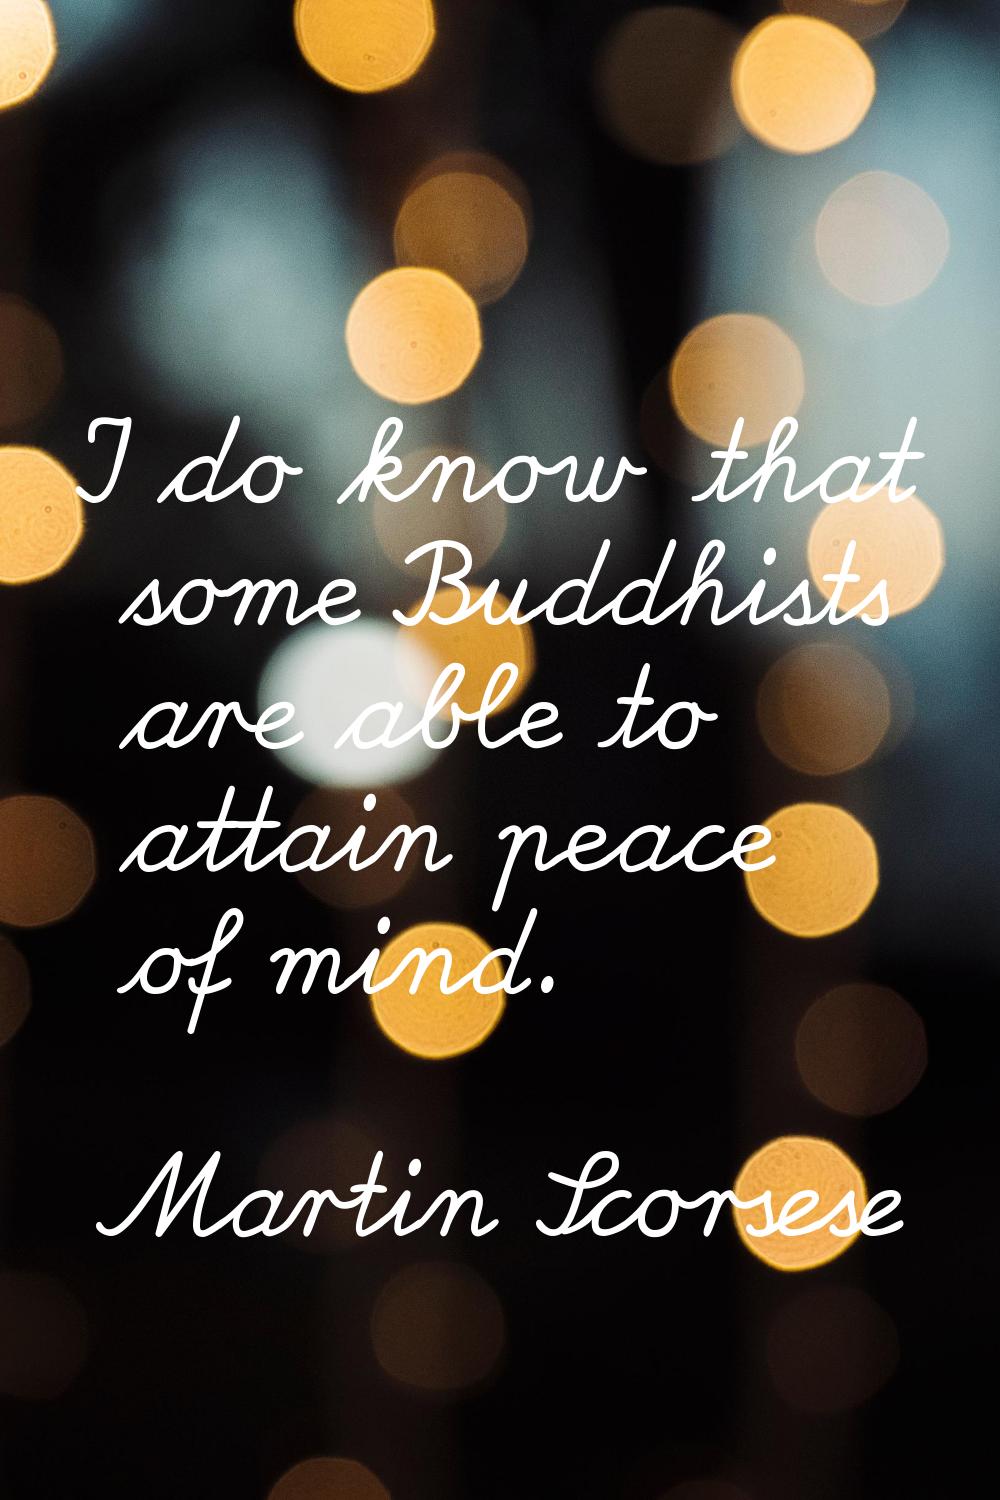 I do know that some Buddhists are able to attain peace of mind.